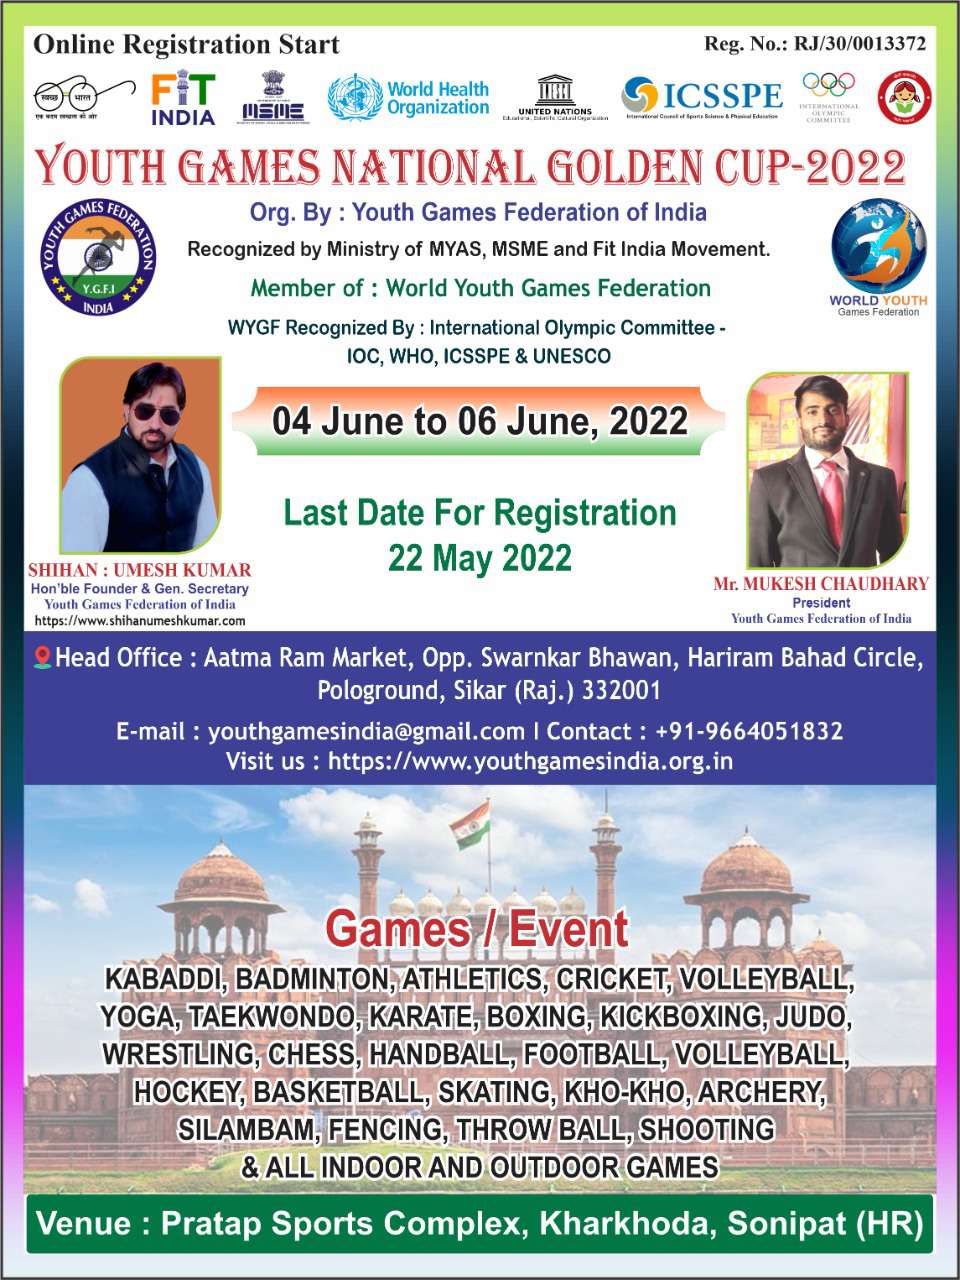 YOUTH GAMES NATIONAL GOLDEN CUP - 2022